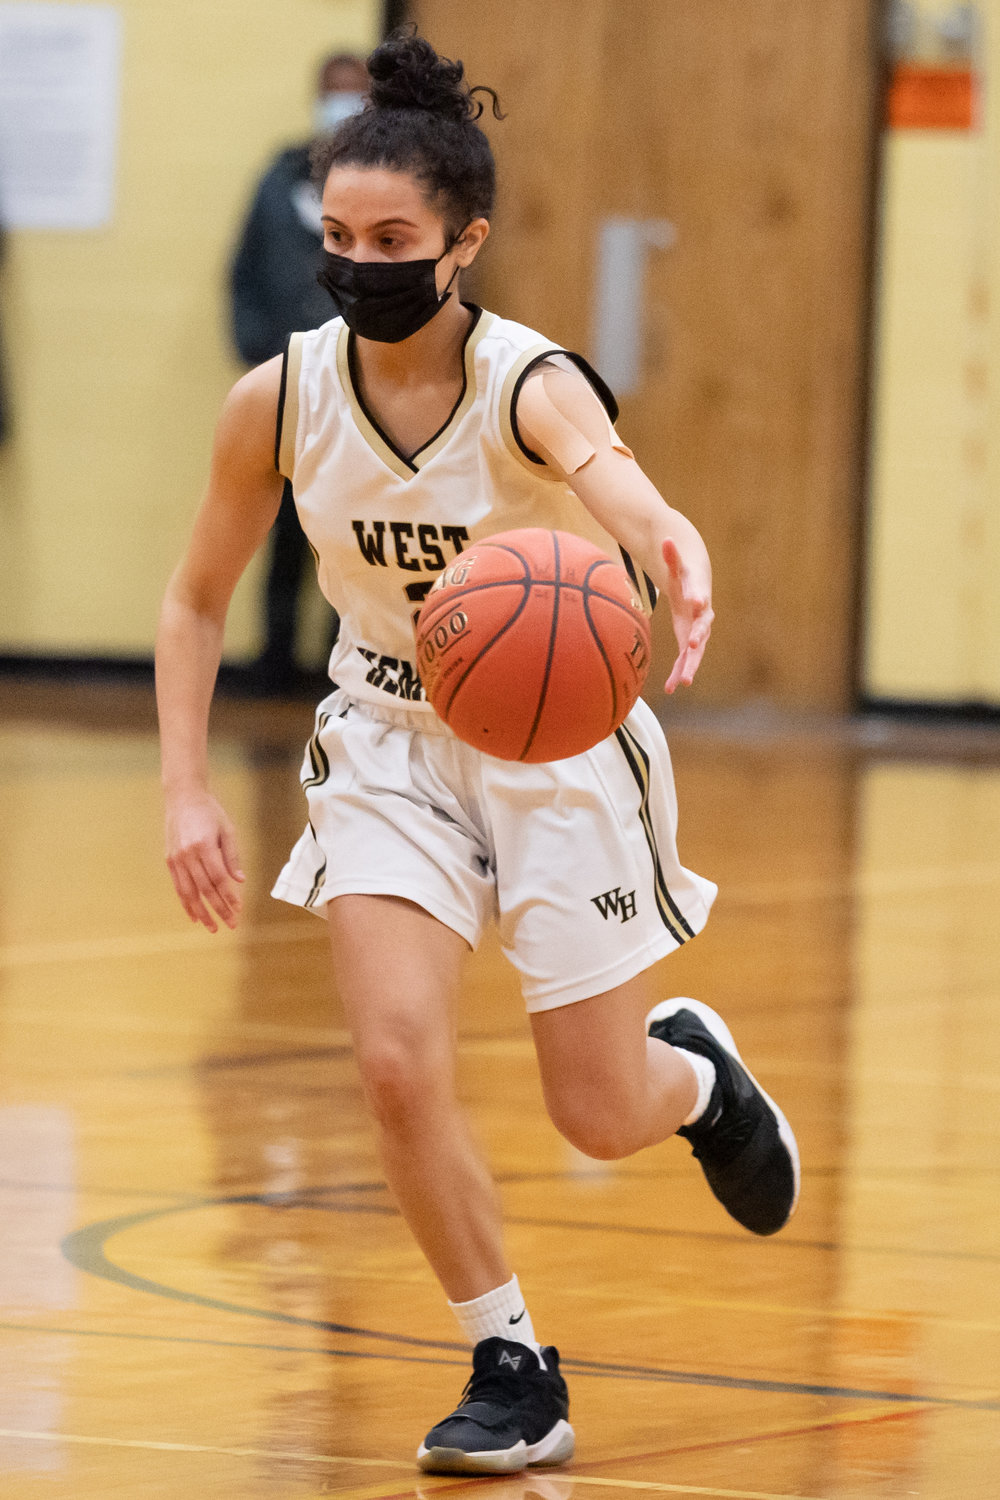 Senior Isabel Tavarez had the hot hand Jan. 18, scoring 19 point to lead West Hempstead to a 47-39 home victory over Oyster Bay.